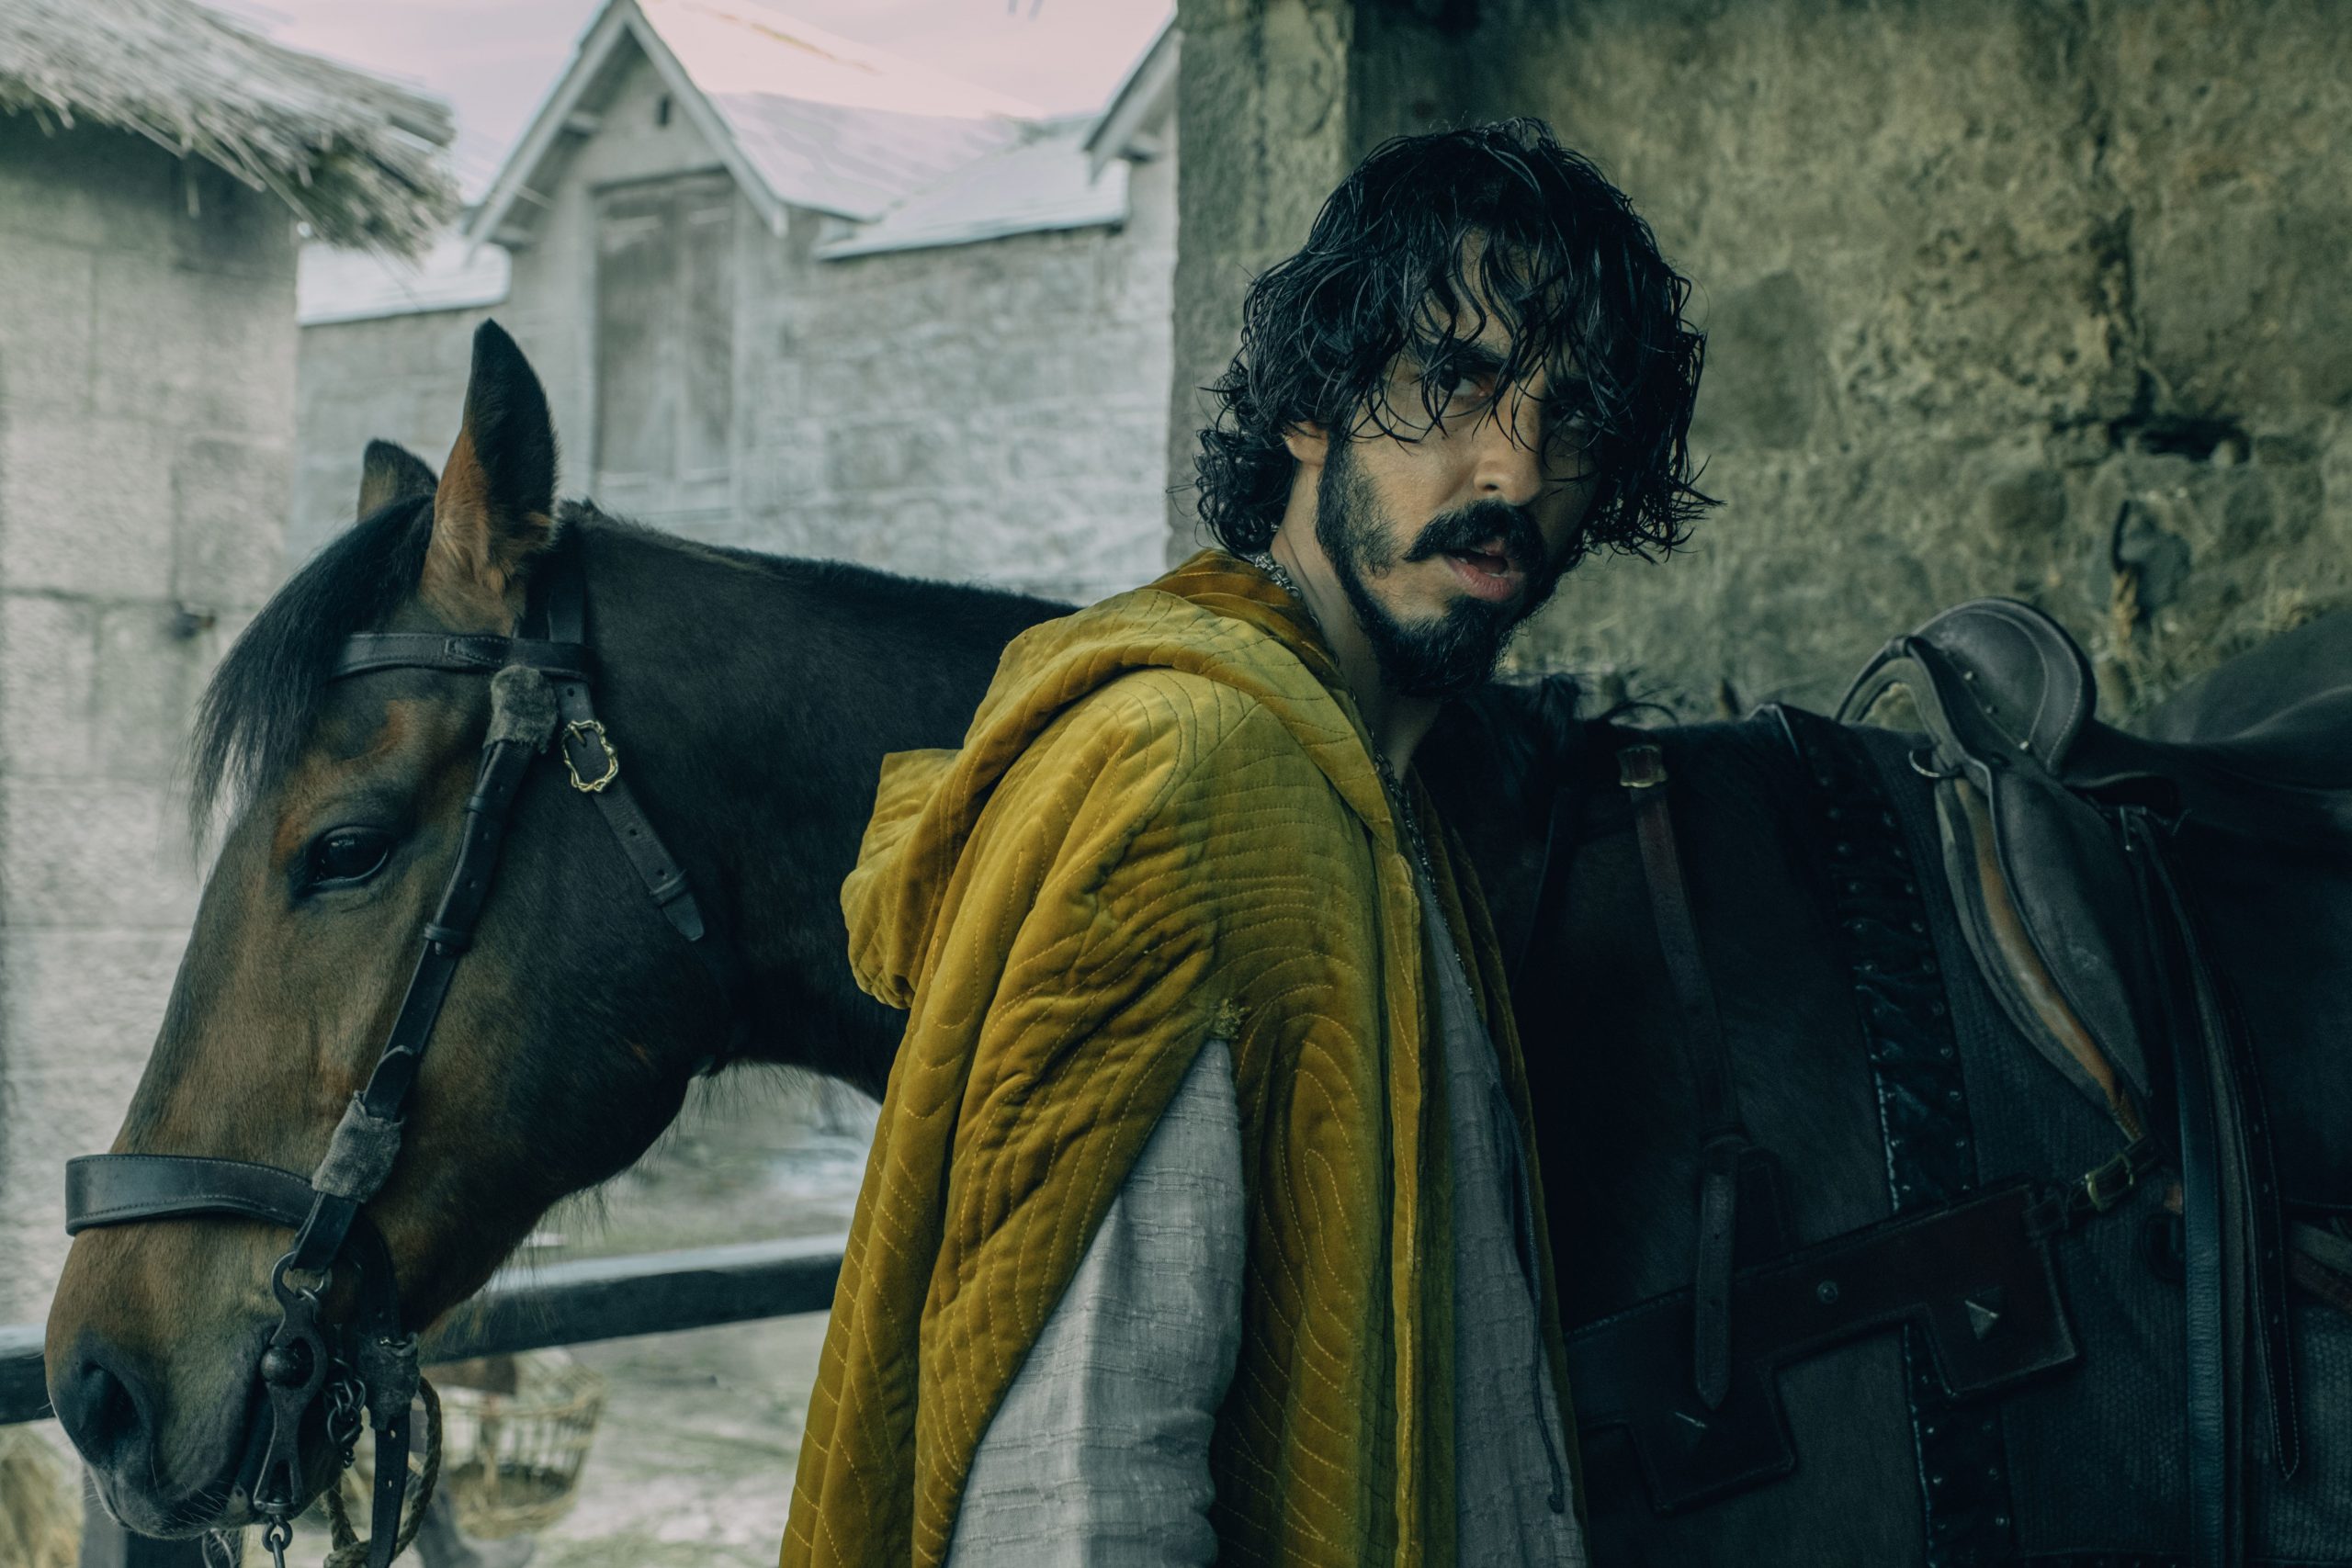 The Medieval Fantasy Film THE GREEN KNIGHT Gets Summer 2021 Release Date —  GeekTyrant